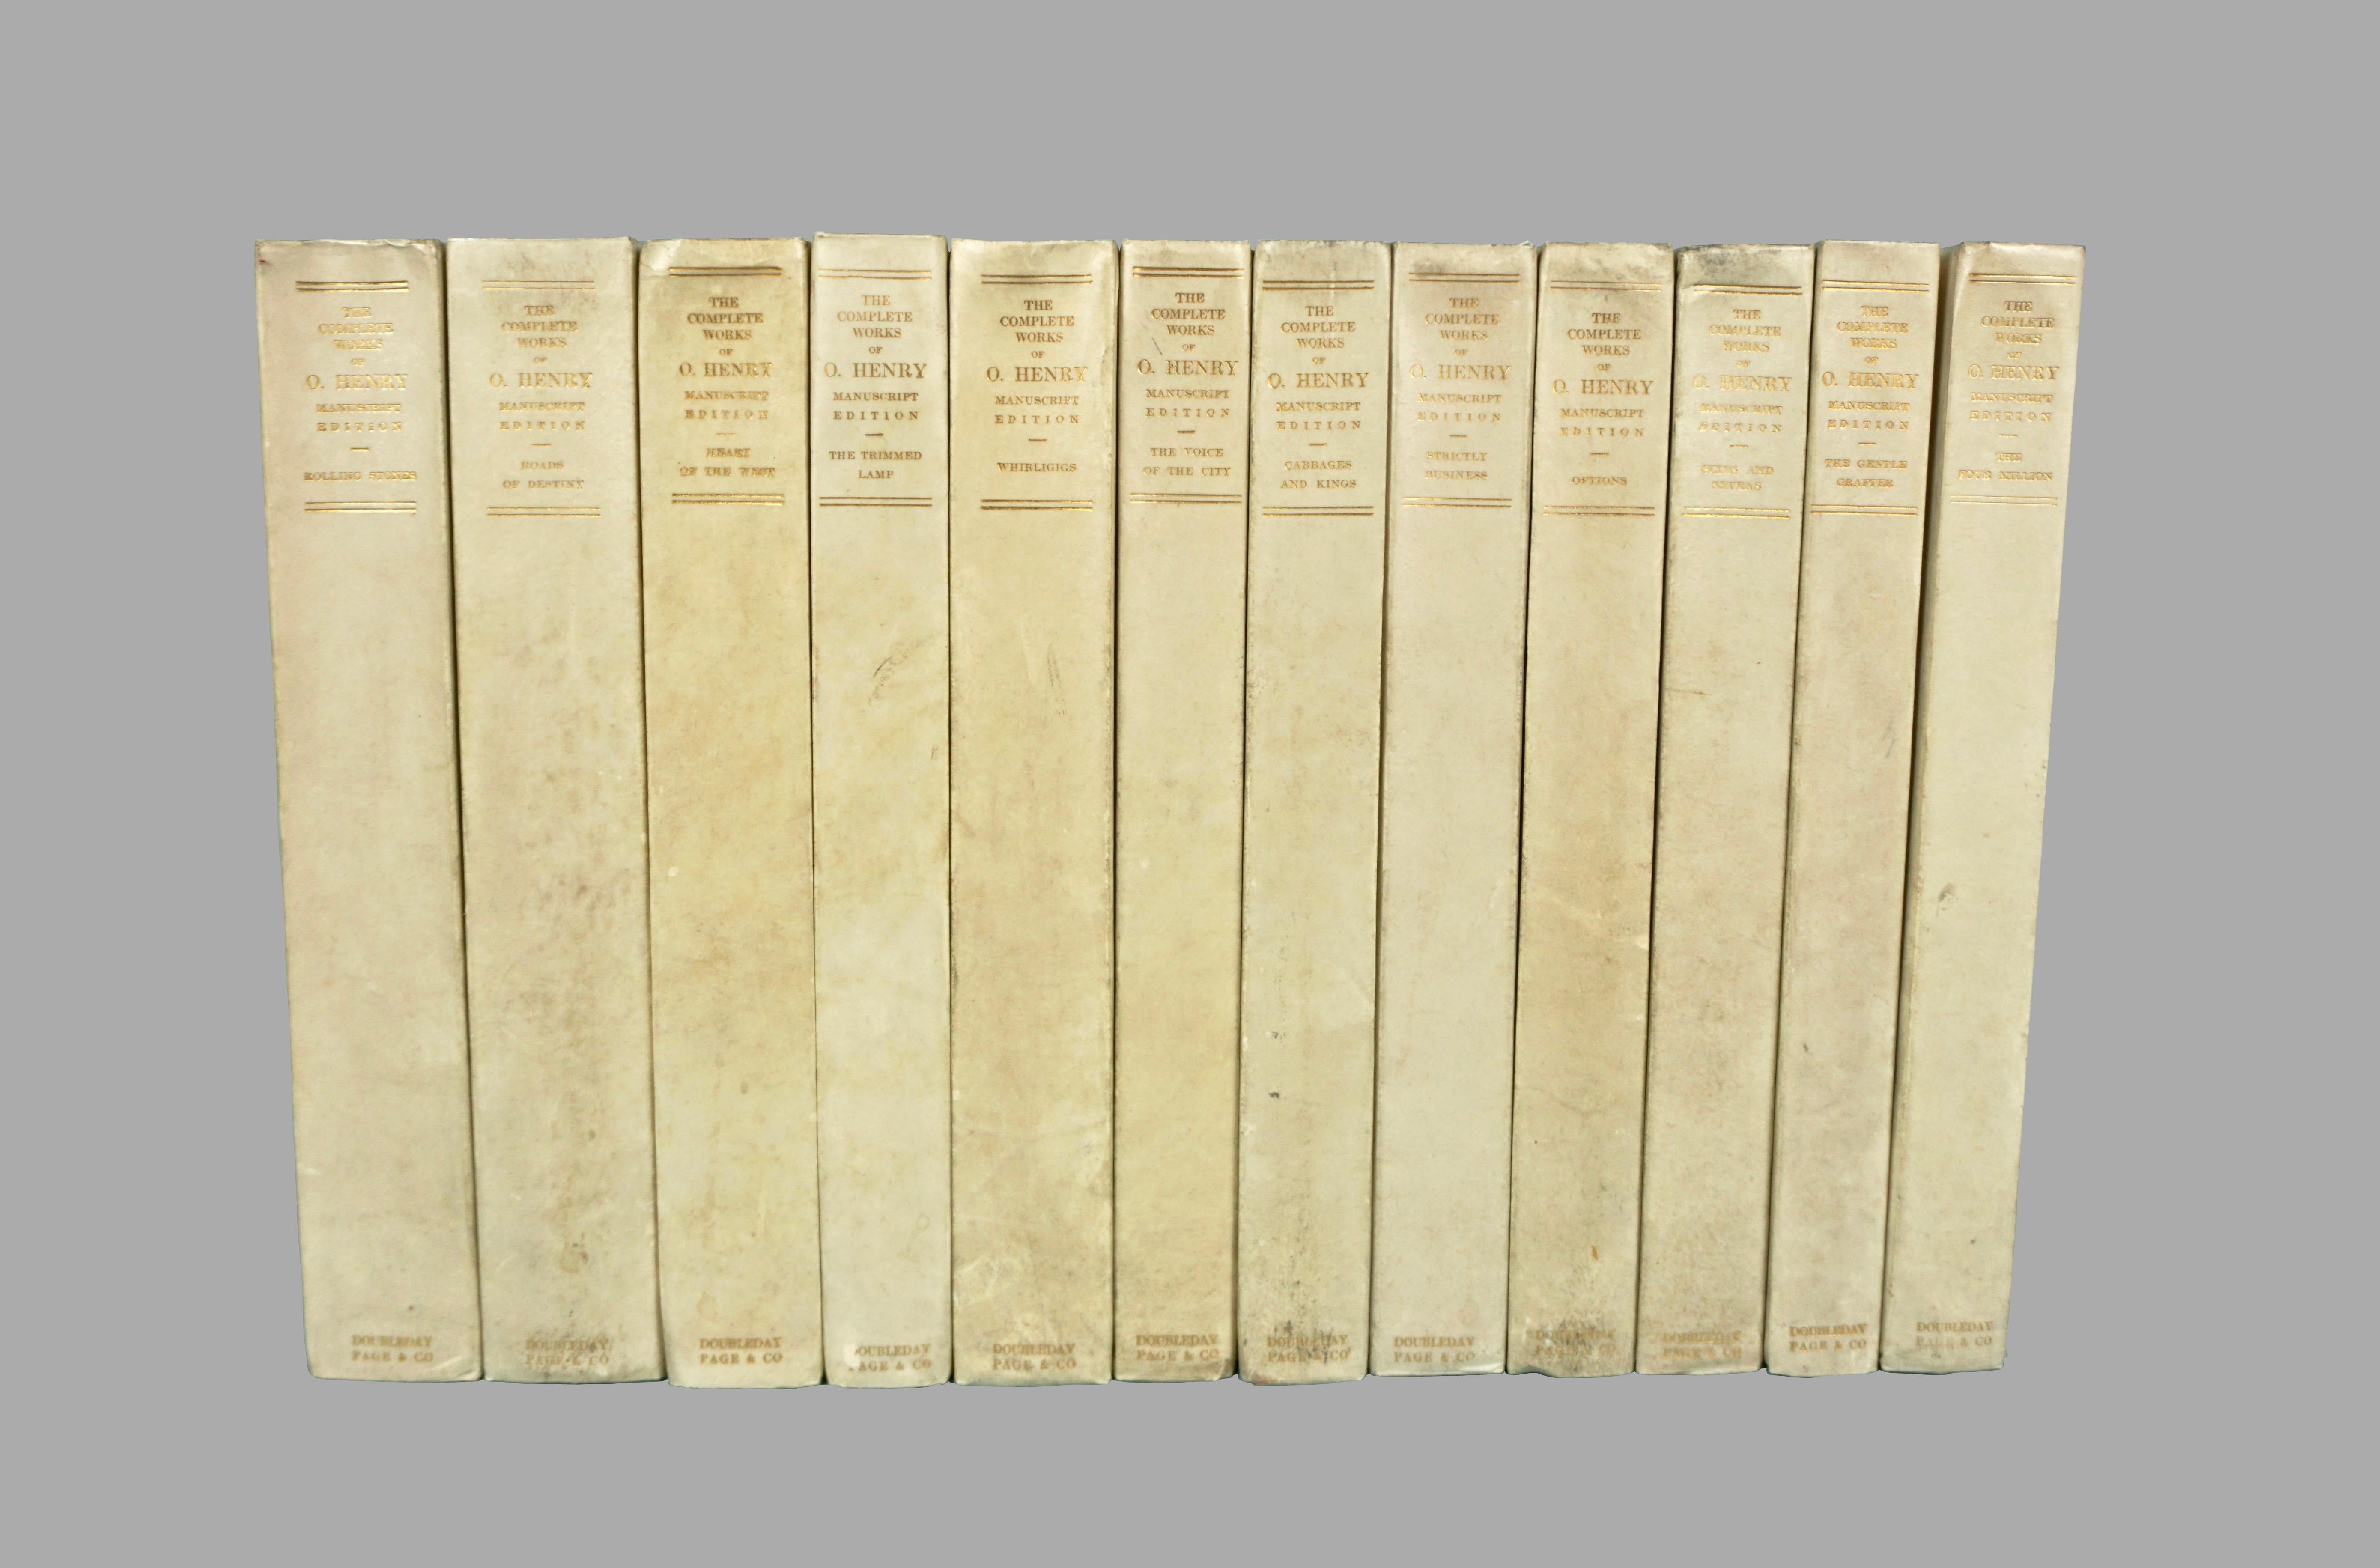 The complete works of O. Henry, manuscript edition, limited to 125 copies in 12 volumes bound in original half vellum. Published by Doubleday, Page & Company, Garden City New York, 1912. This edition contains 2 original pages in O. Henry's